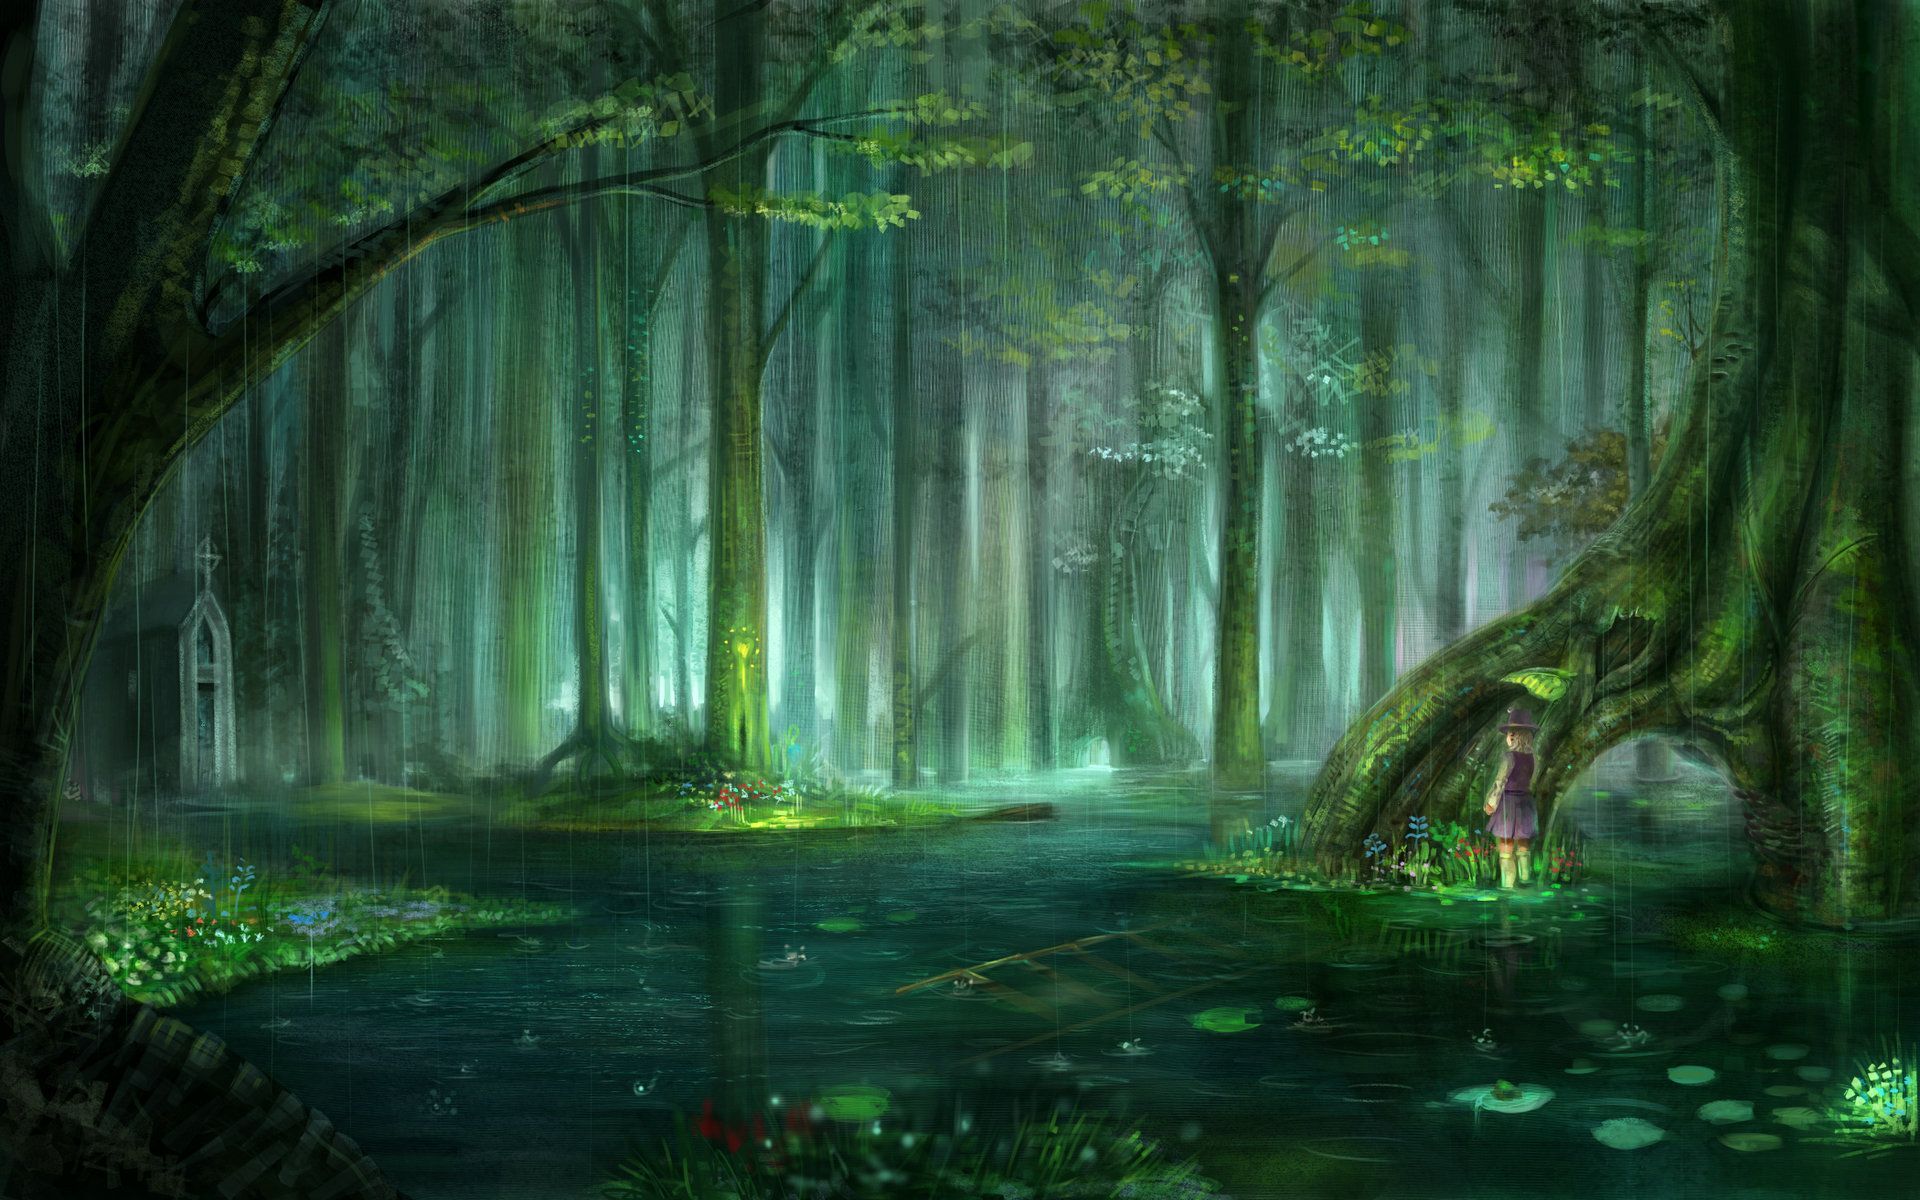 enchanted forest with fairies wallpaper